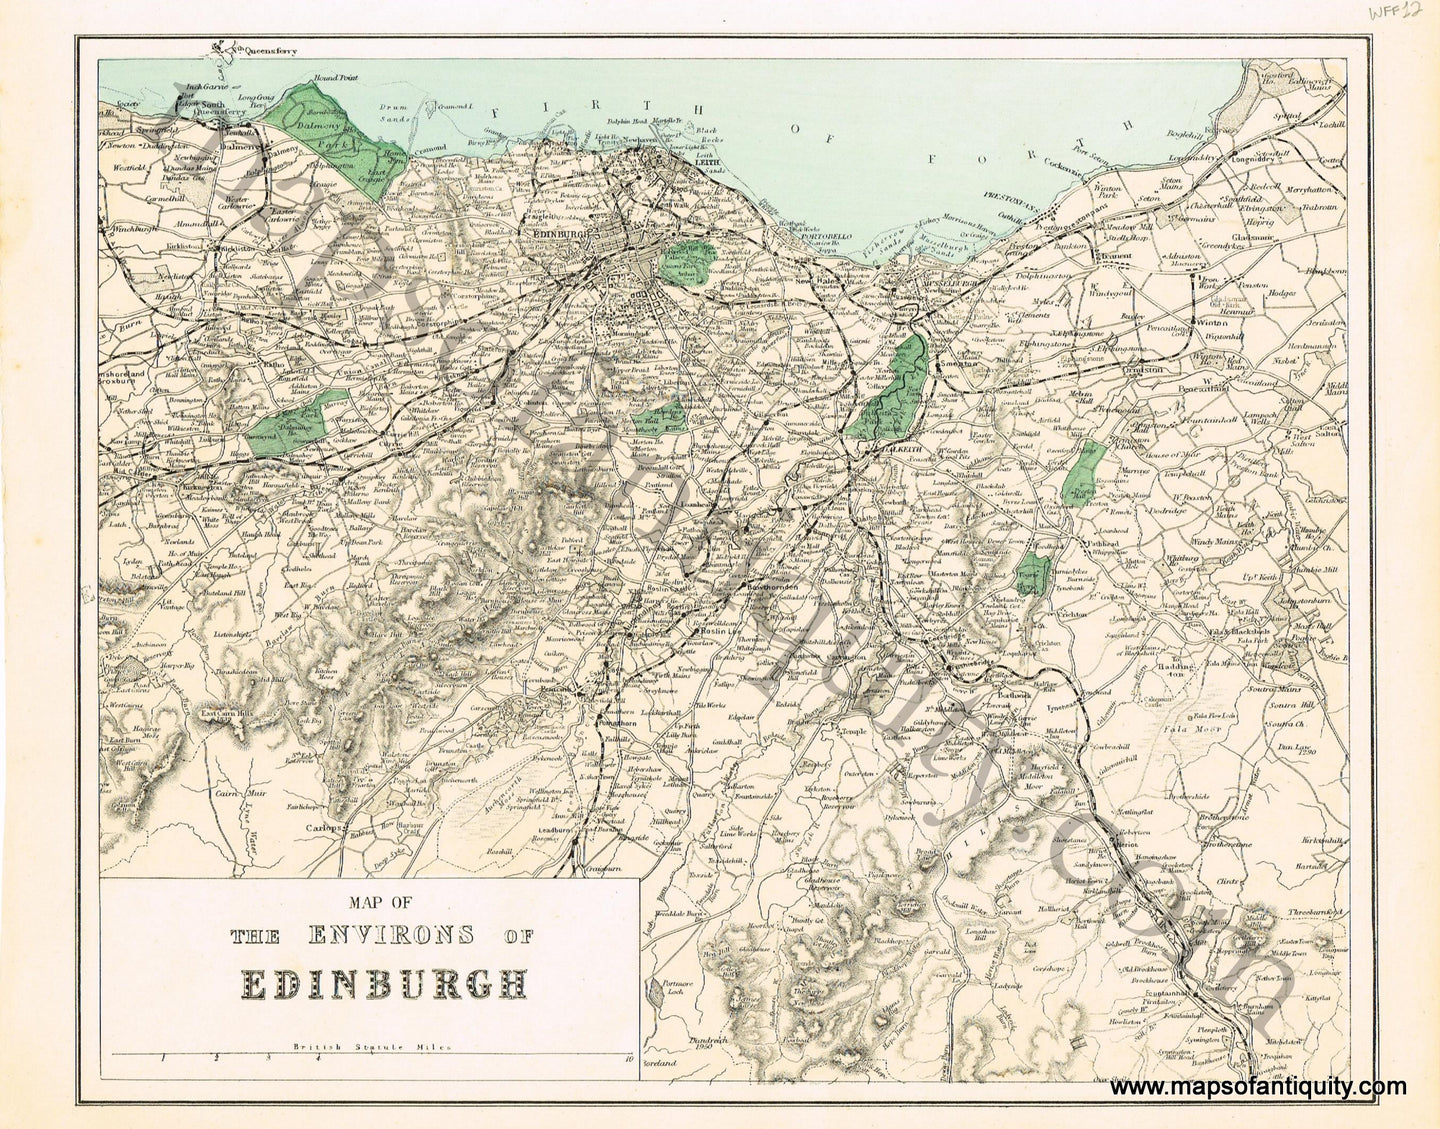 Antique-Hand-Colored-Map-Map-of-The-Environs-of-Edinburgh-Europe-European-Cities-Scotland-c.-1883-Weller-Maps-Of-Antiquity